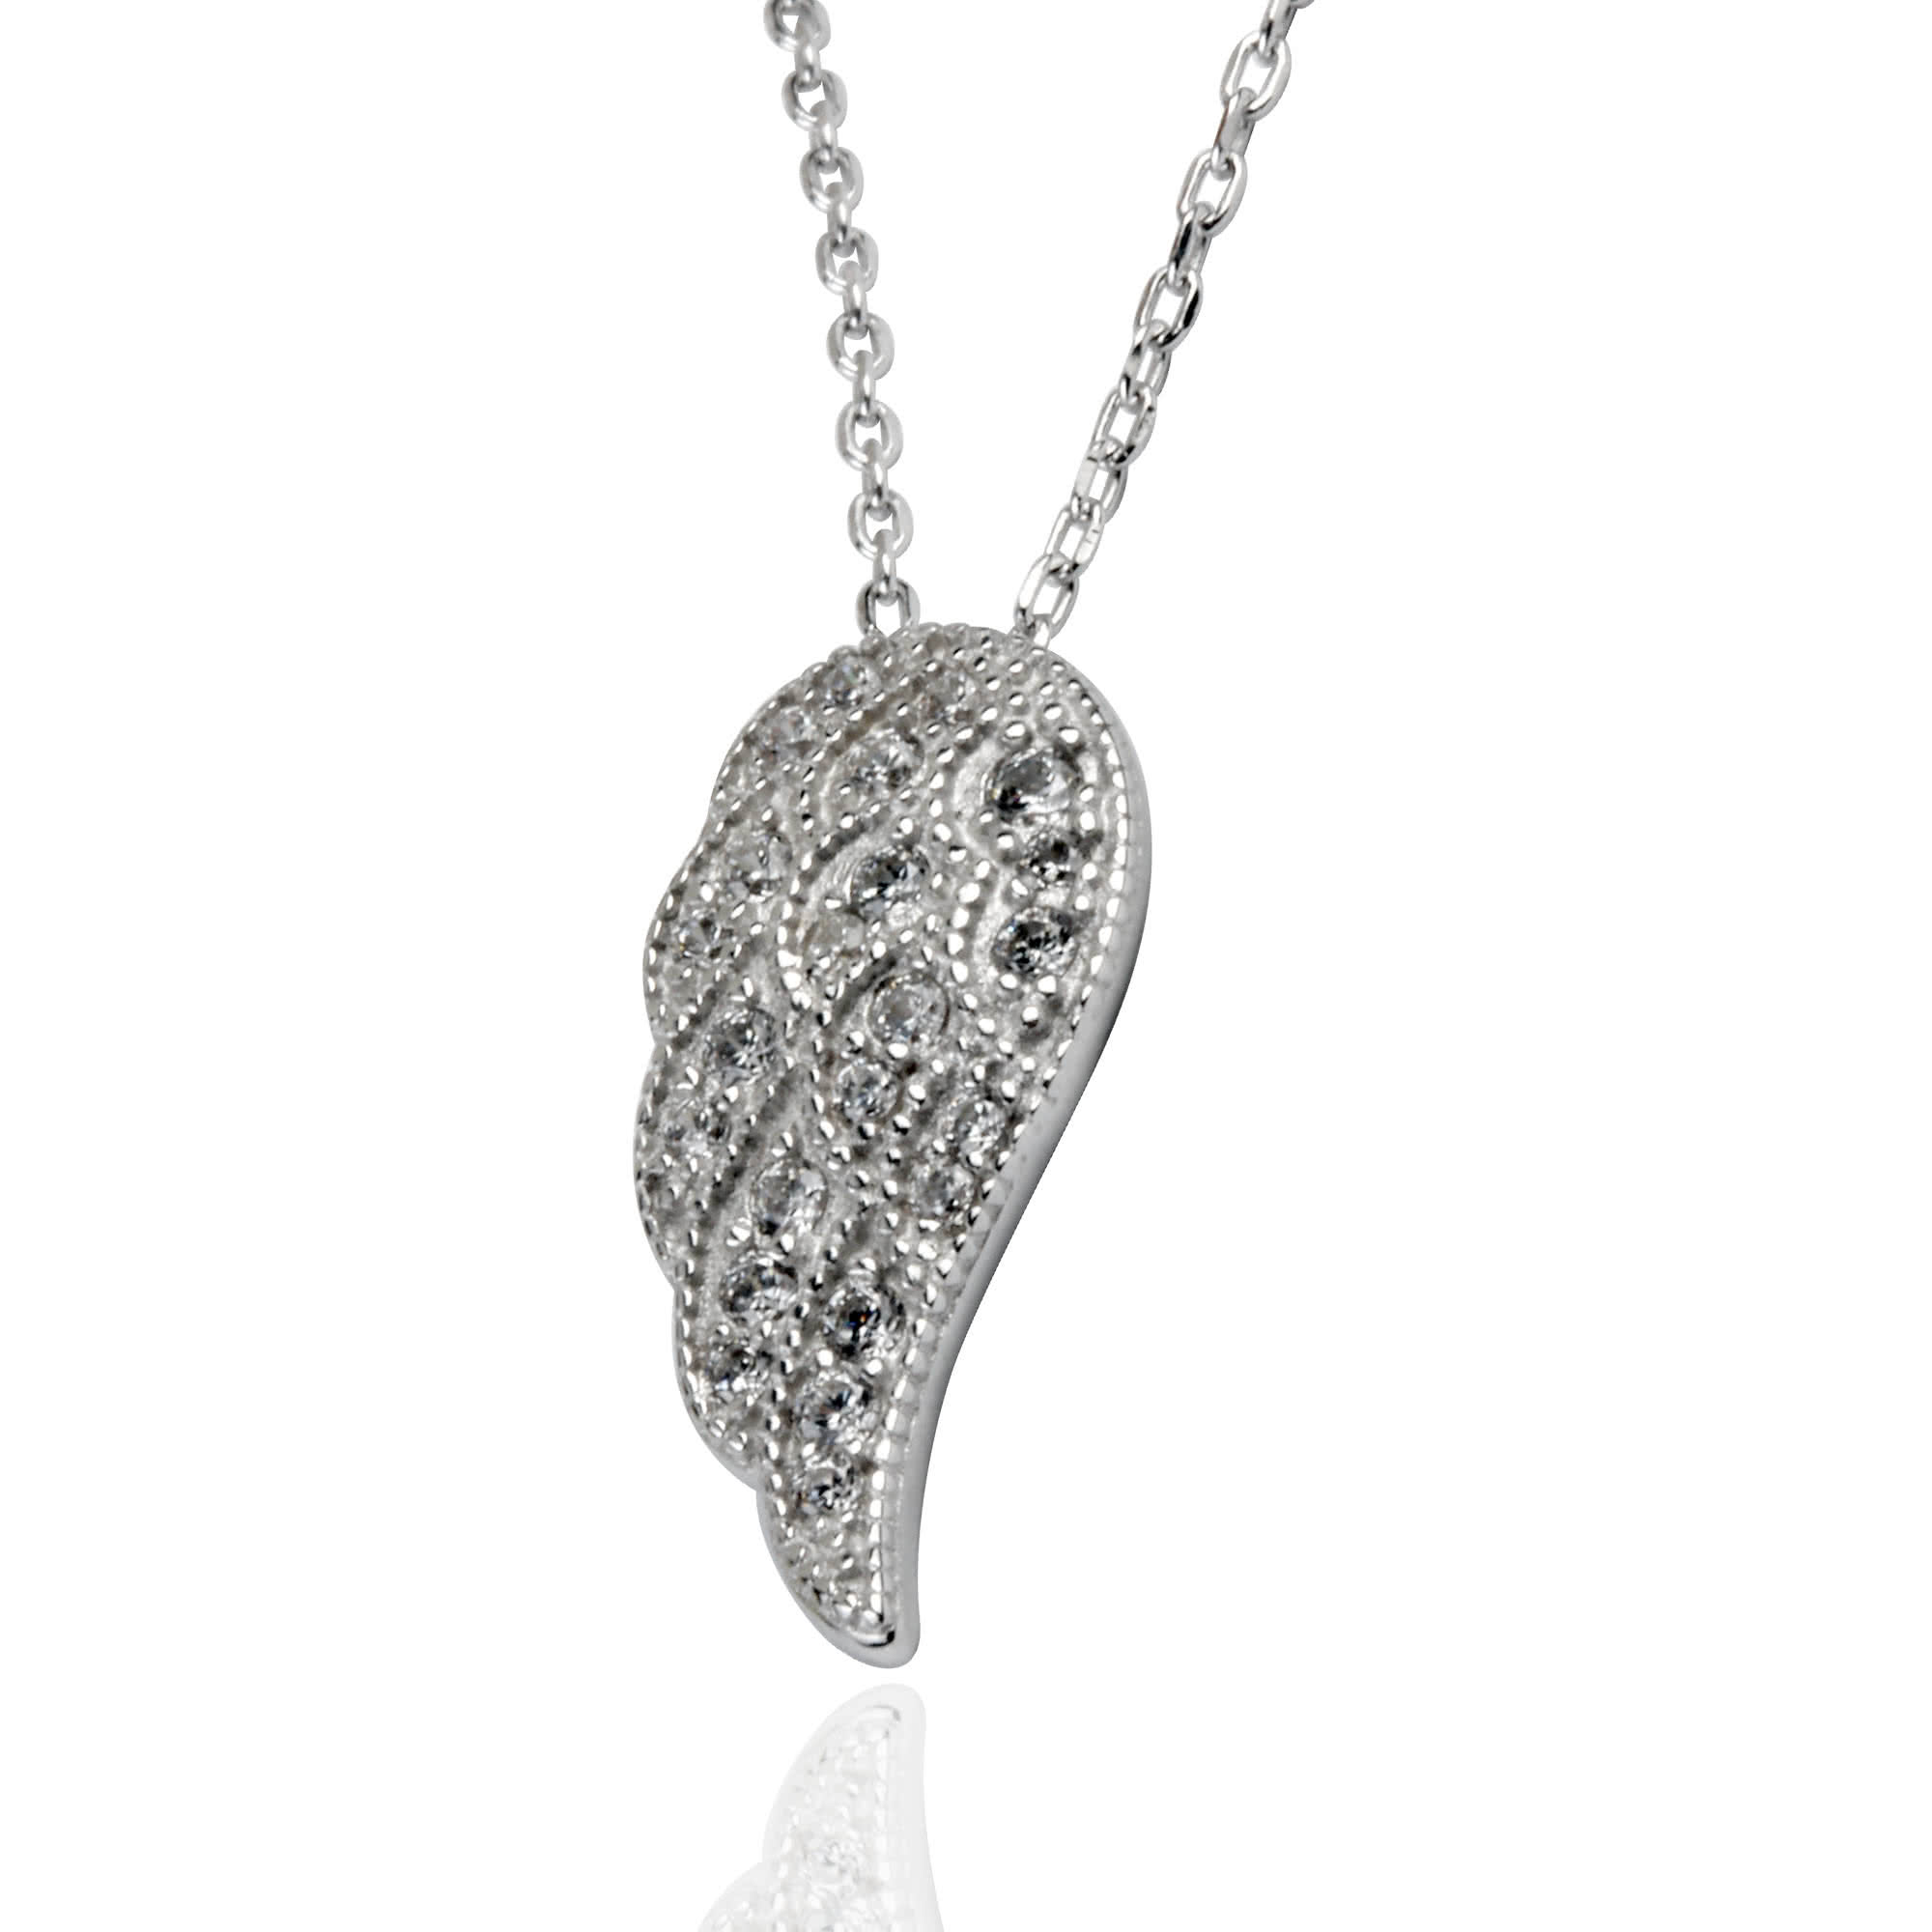 Sparkling Silver Angel Wing Pendant